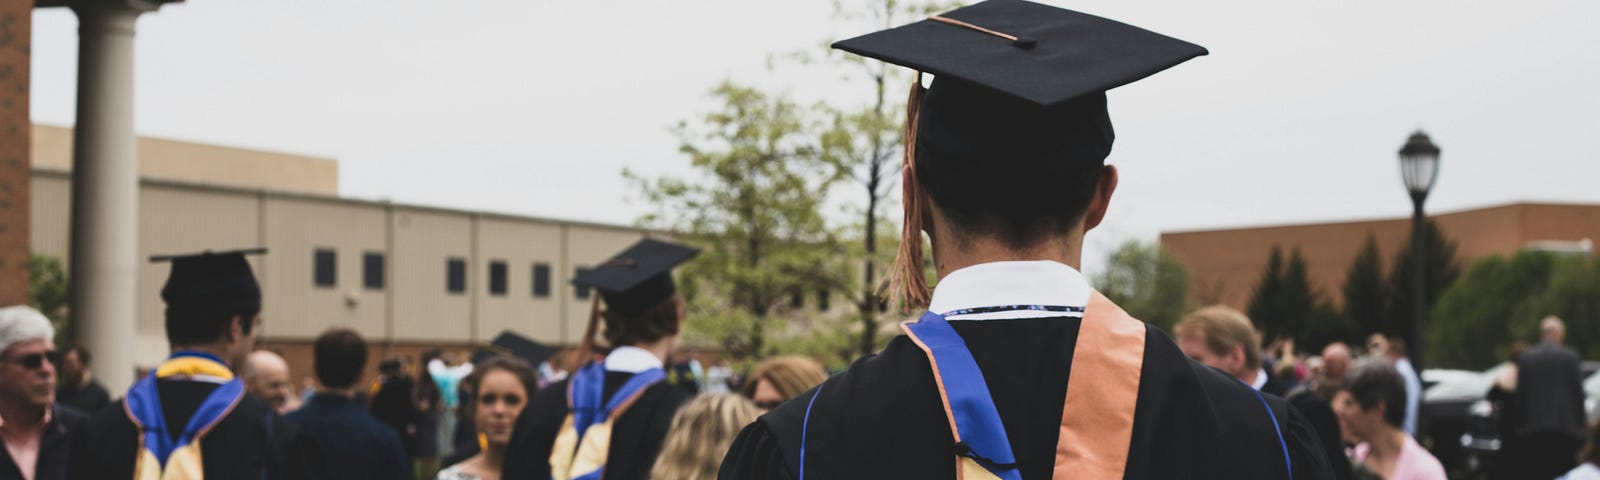 A view from the back of a college graduate in cap and gown, with other graduates in the background.